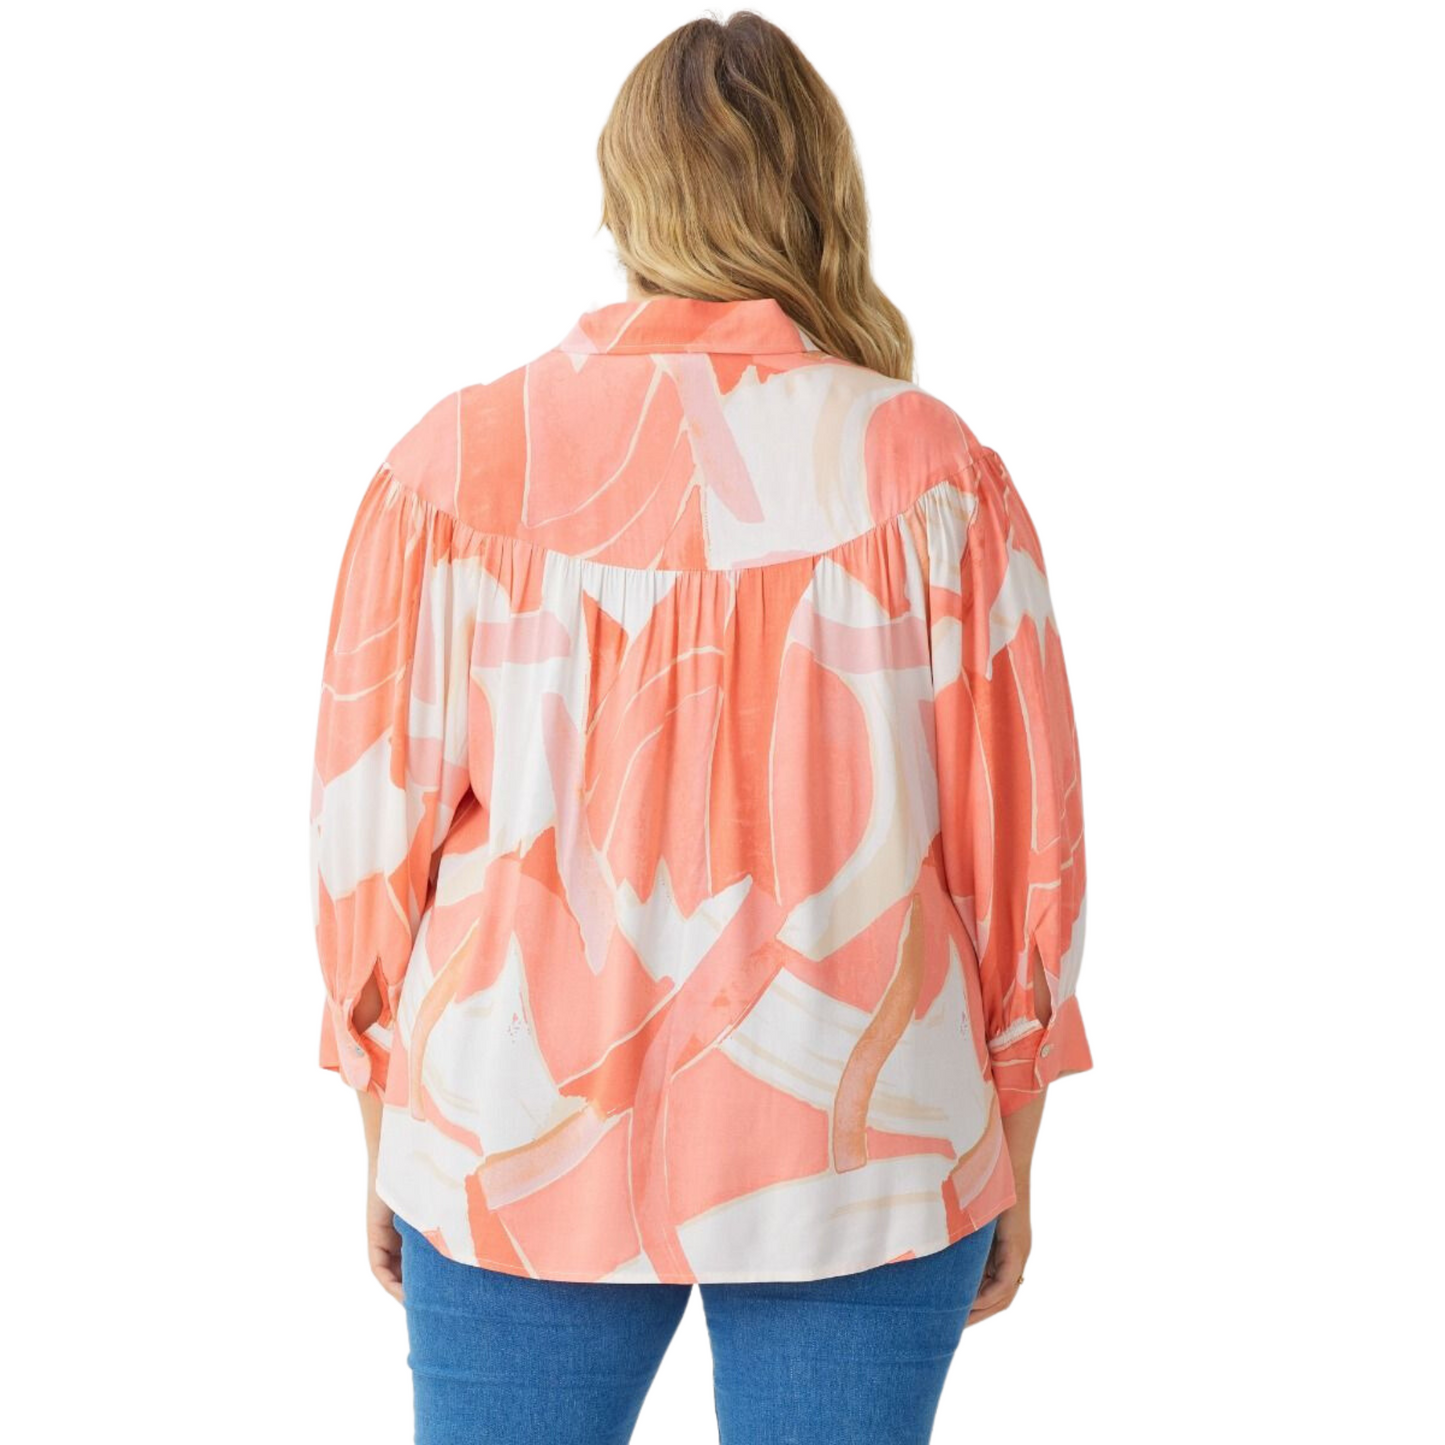 Plus size print collared button up long sleeve top featuring gathering at yoke. Button closure at sleeves. Unlined. Woven. Non-sheer. Lightweight.